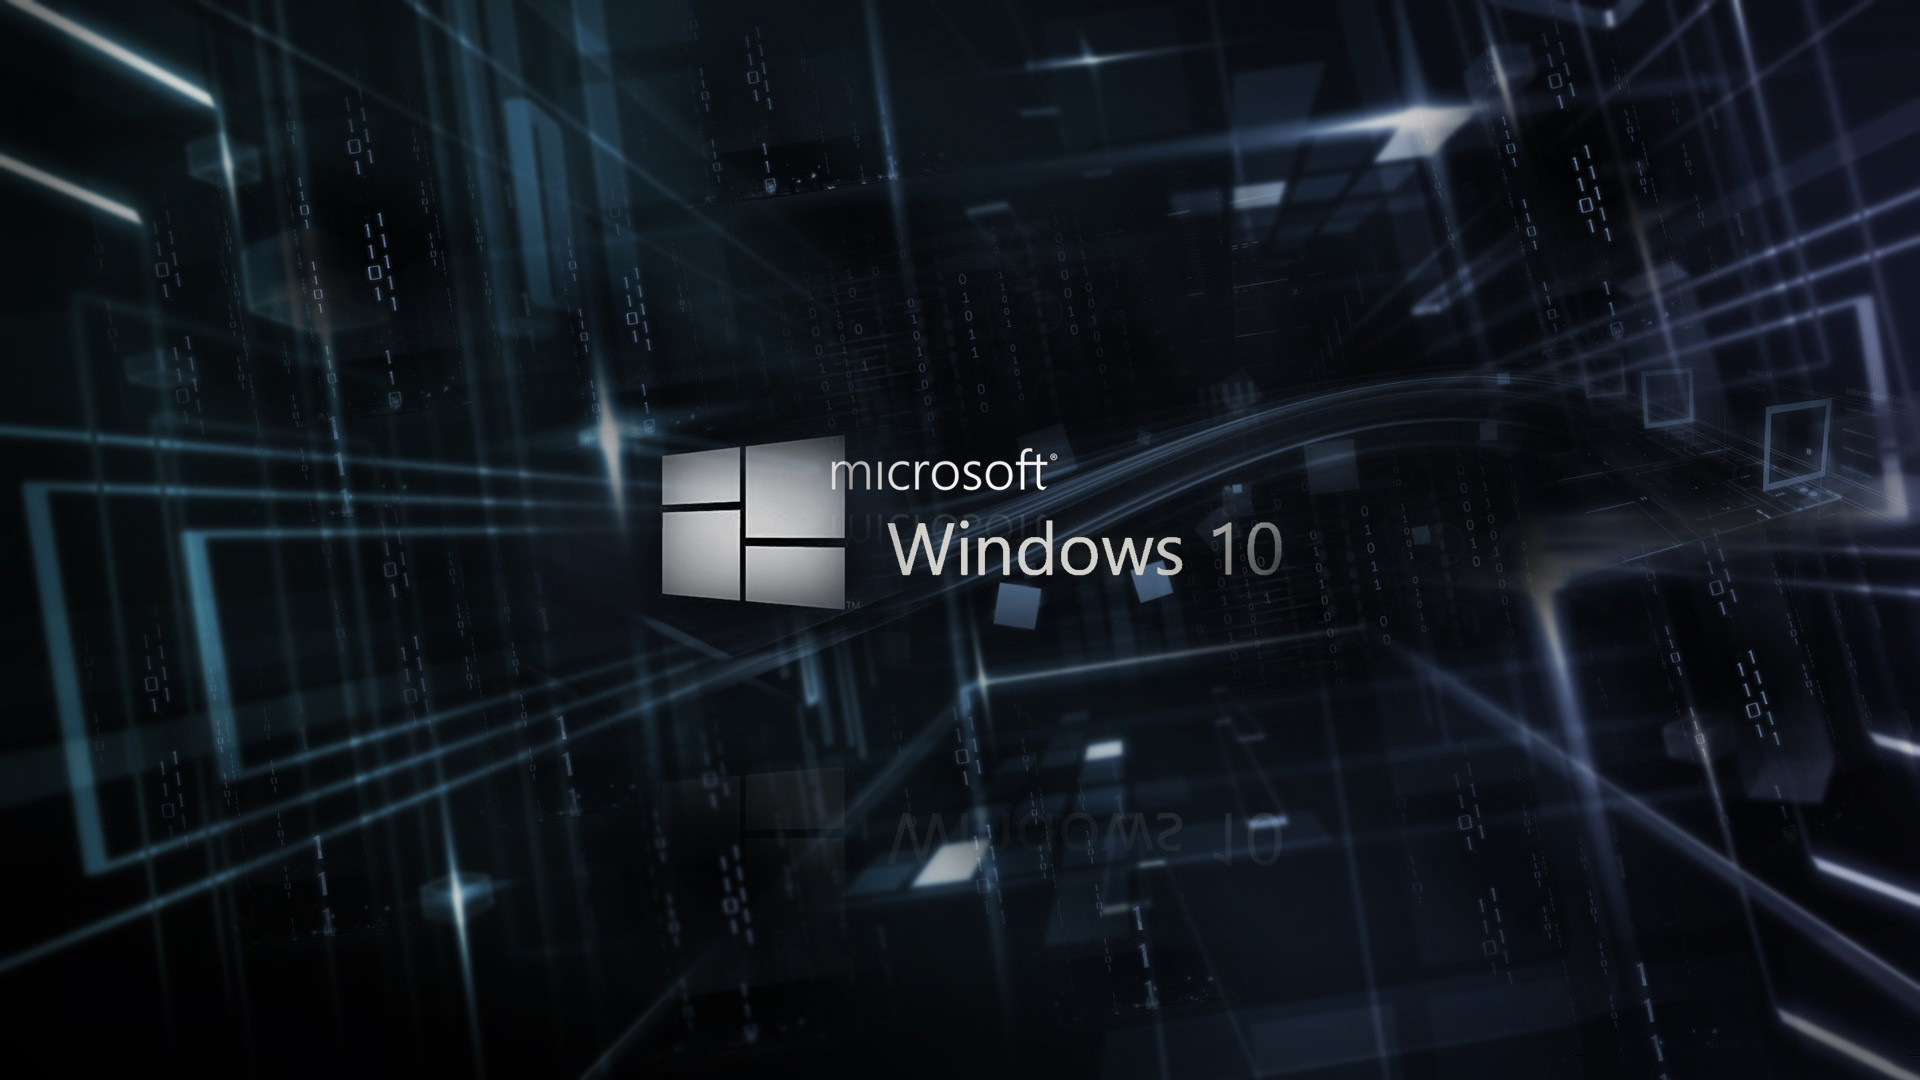 1920x1080 Live Wallpaper HD 9 for Windows 10 is free HD wallpaper. This .